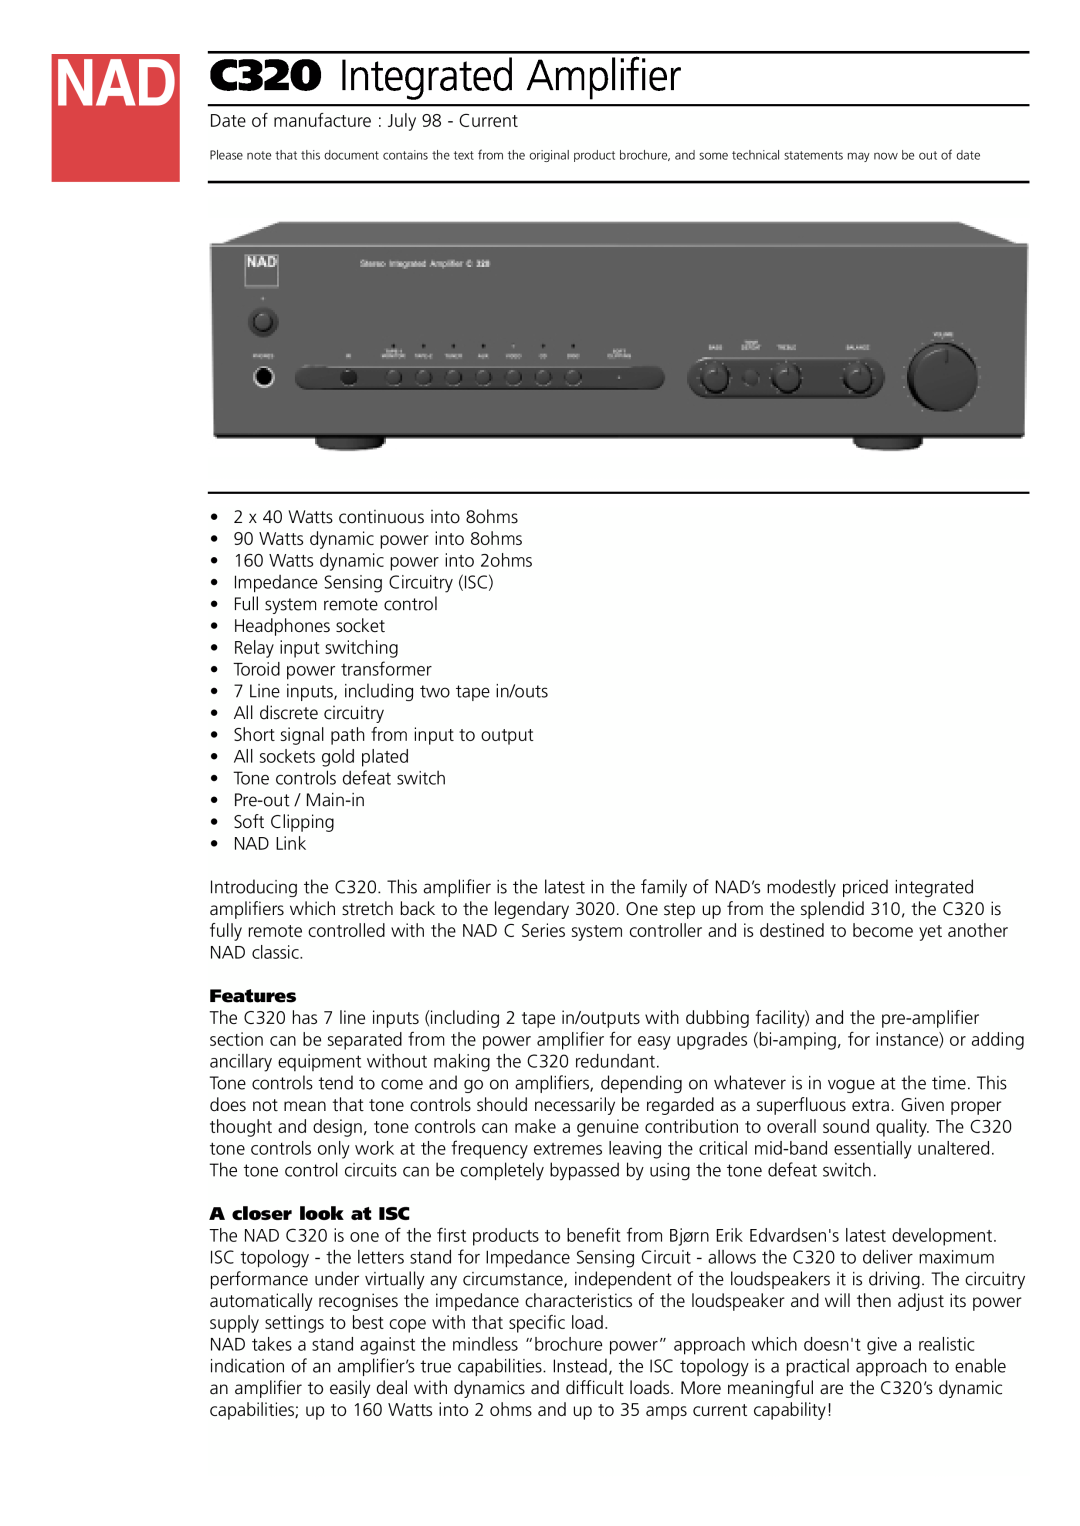 NAD brochure C320 Integrated Amplifier, Features, A closer look at ISC 